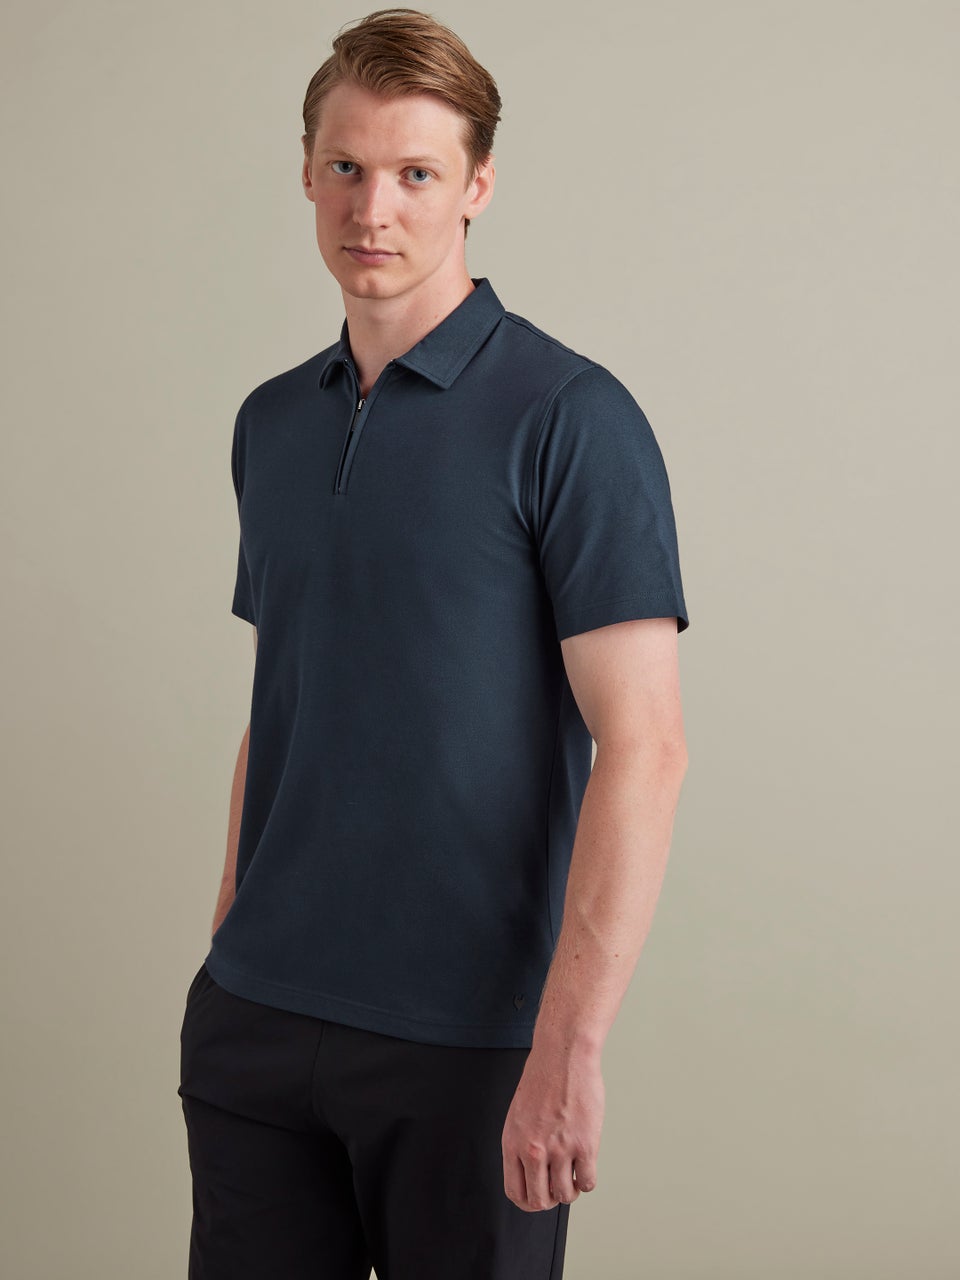 In Motion Performance Pique Polo Navy